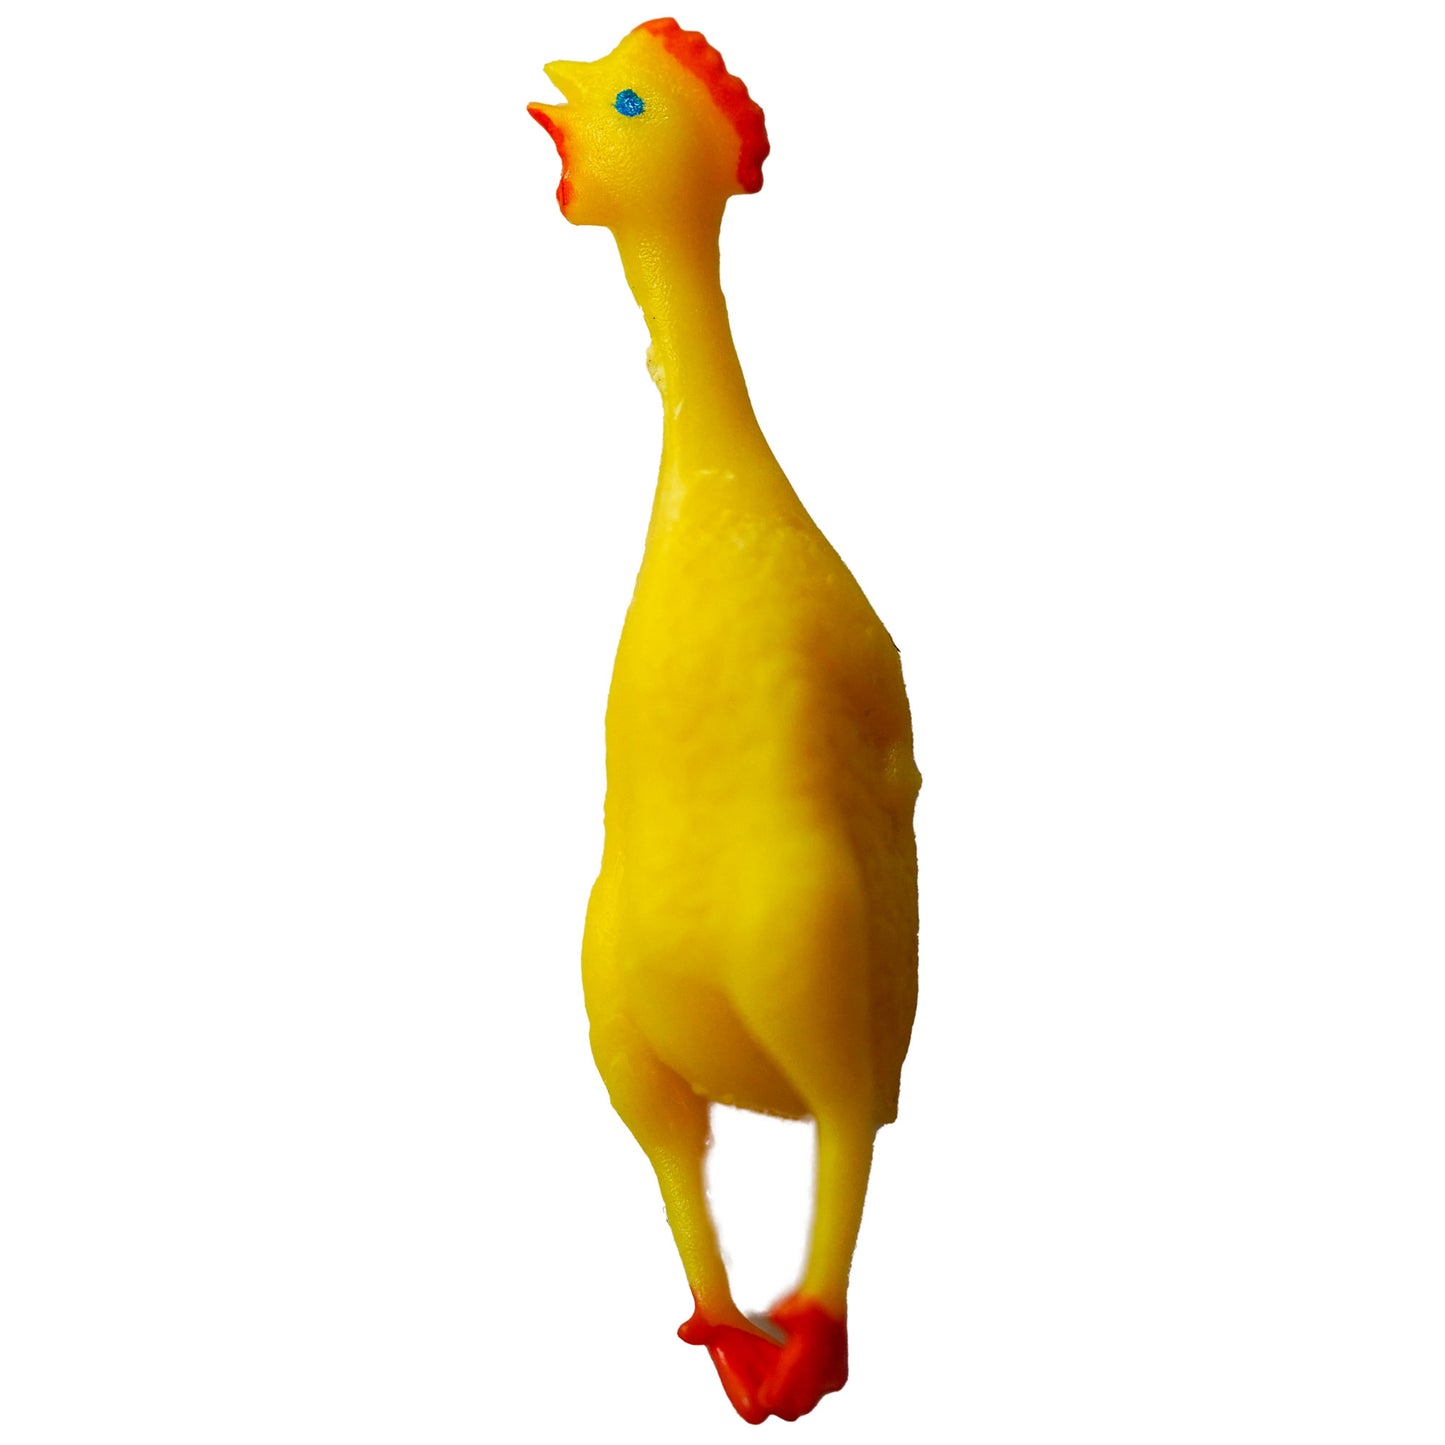 Have a fever for Rubber Chickens? Your prescription has been filled